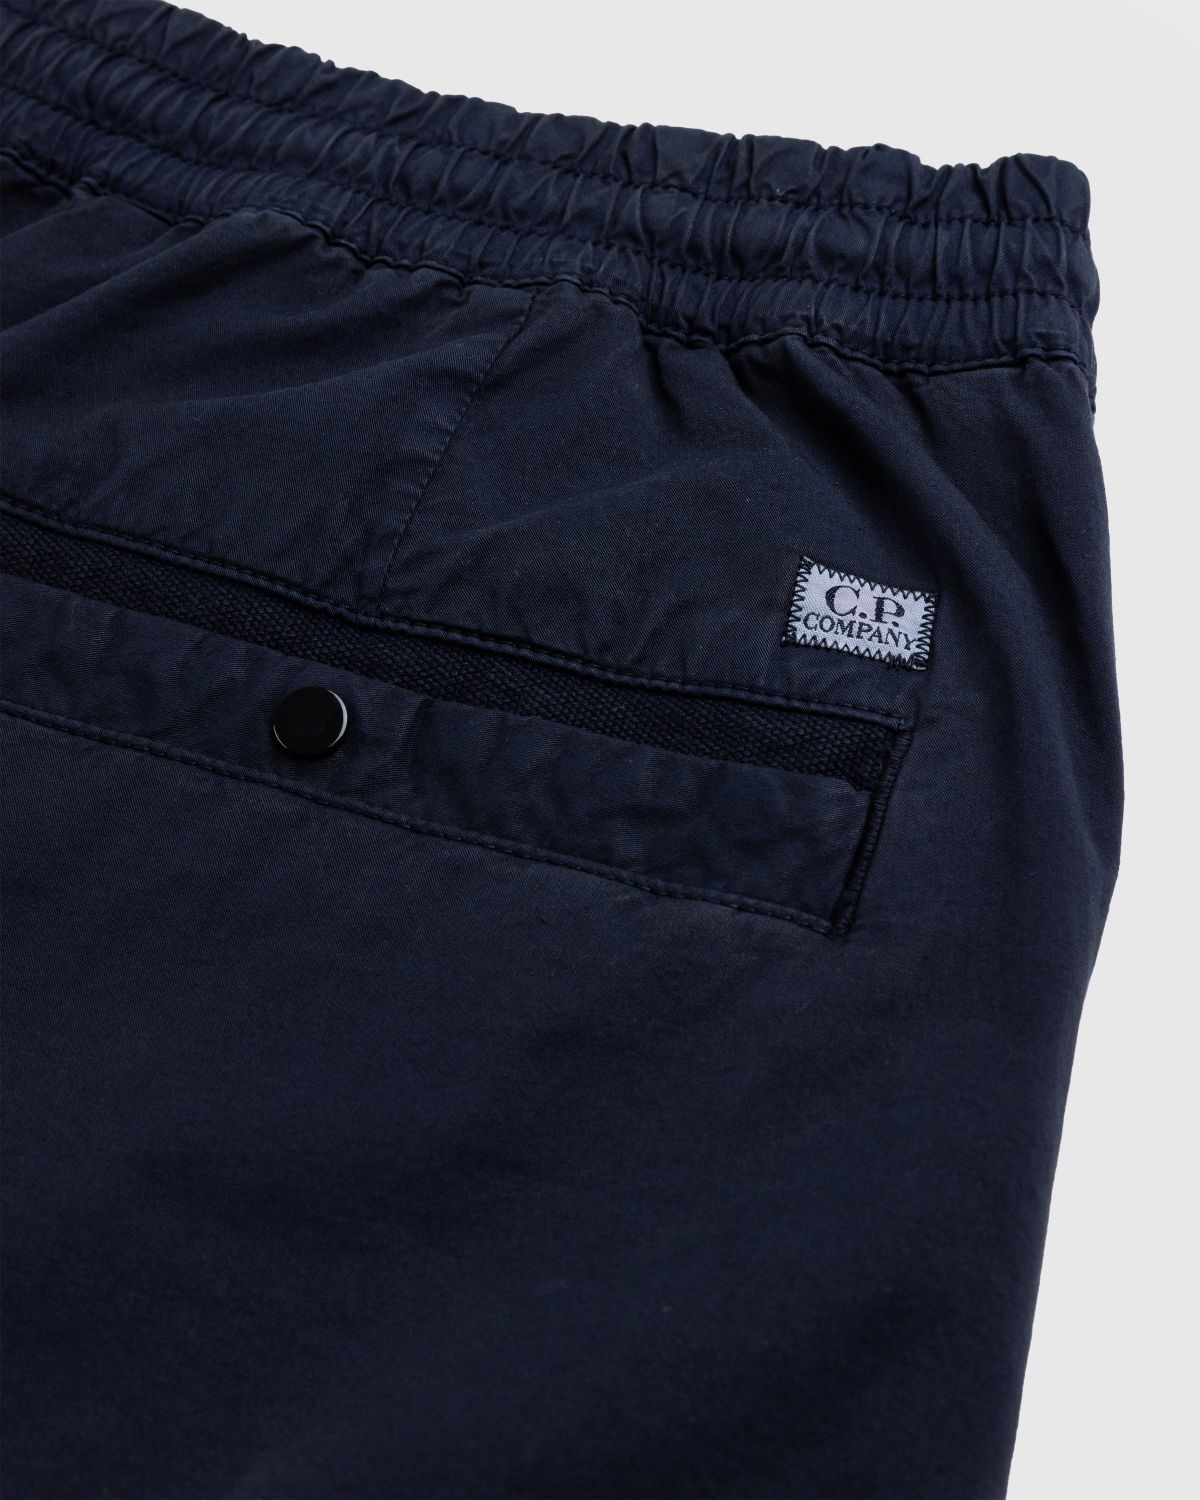 C.P. Company – Twill Stretch Utility Shorts Total Eclipse Blue - Shorts - Blue - Image 5